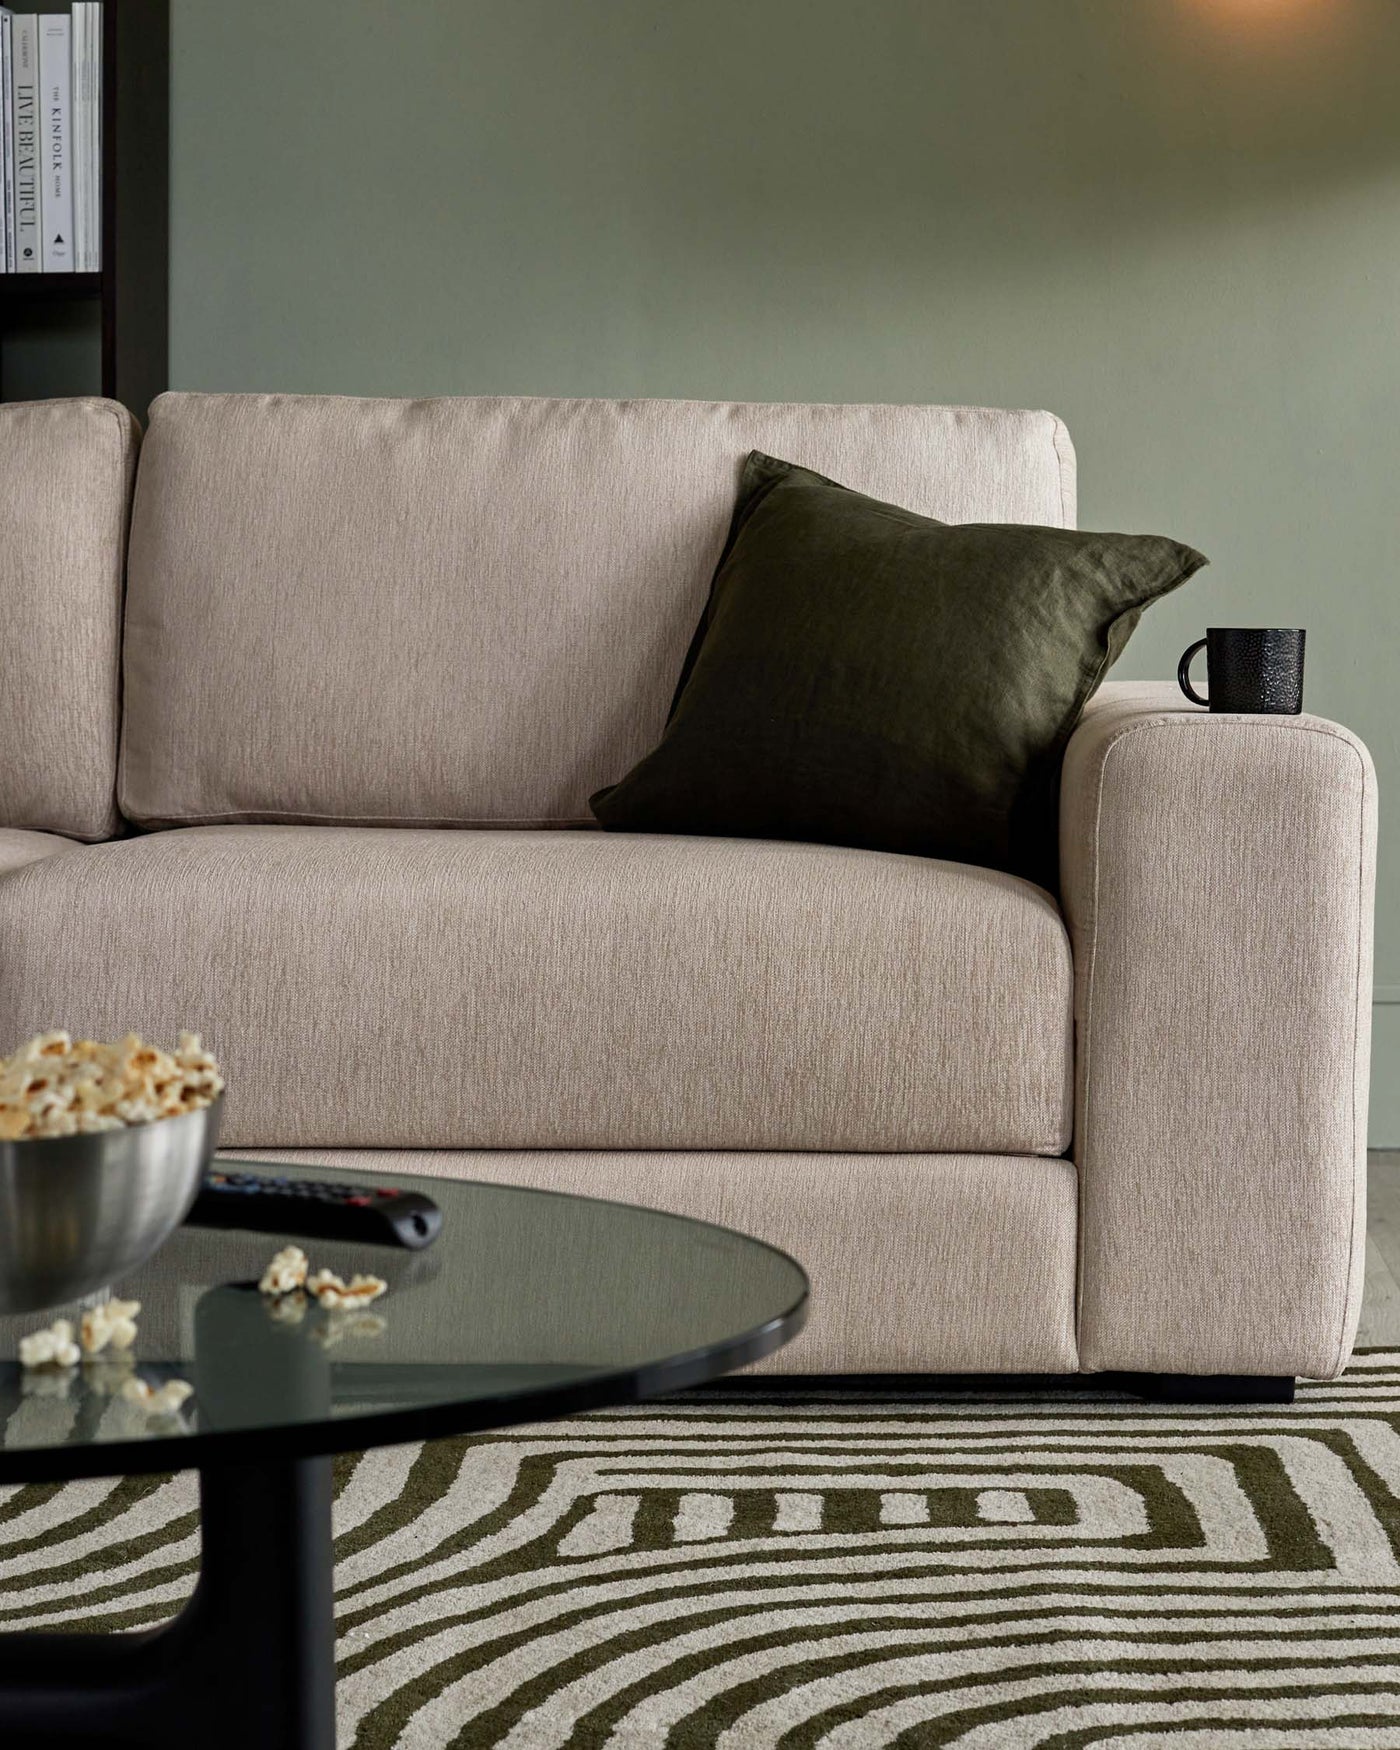 A contemporary beige fabric sofa with clean lines and a minimalist design, featuring one armrest visible on the right and a cushioned back. The sofa is adorned with a single dark olive green throw pillow and has a round armrest on one side where a black mug is placed. In the foreground, a round, smoked glass coffee table with a black frame holds a bowl of popcorn and a remote control, situated on top of a patterned area rug with geometric shapes in neutral tones.